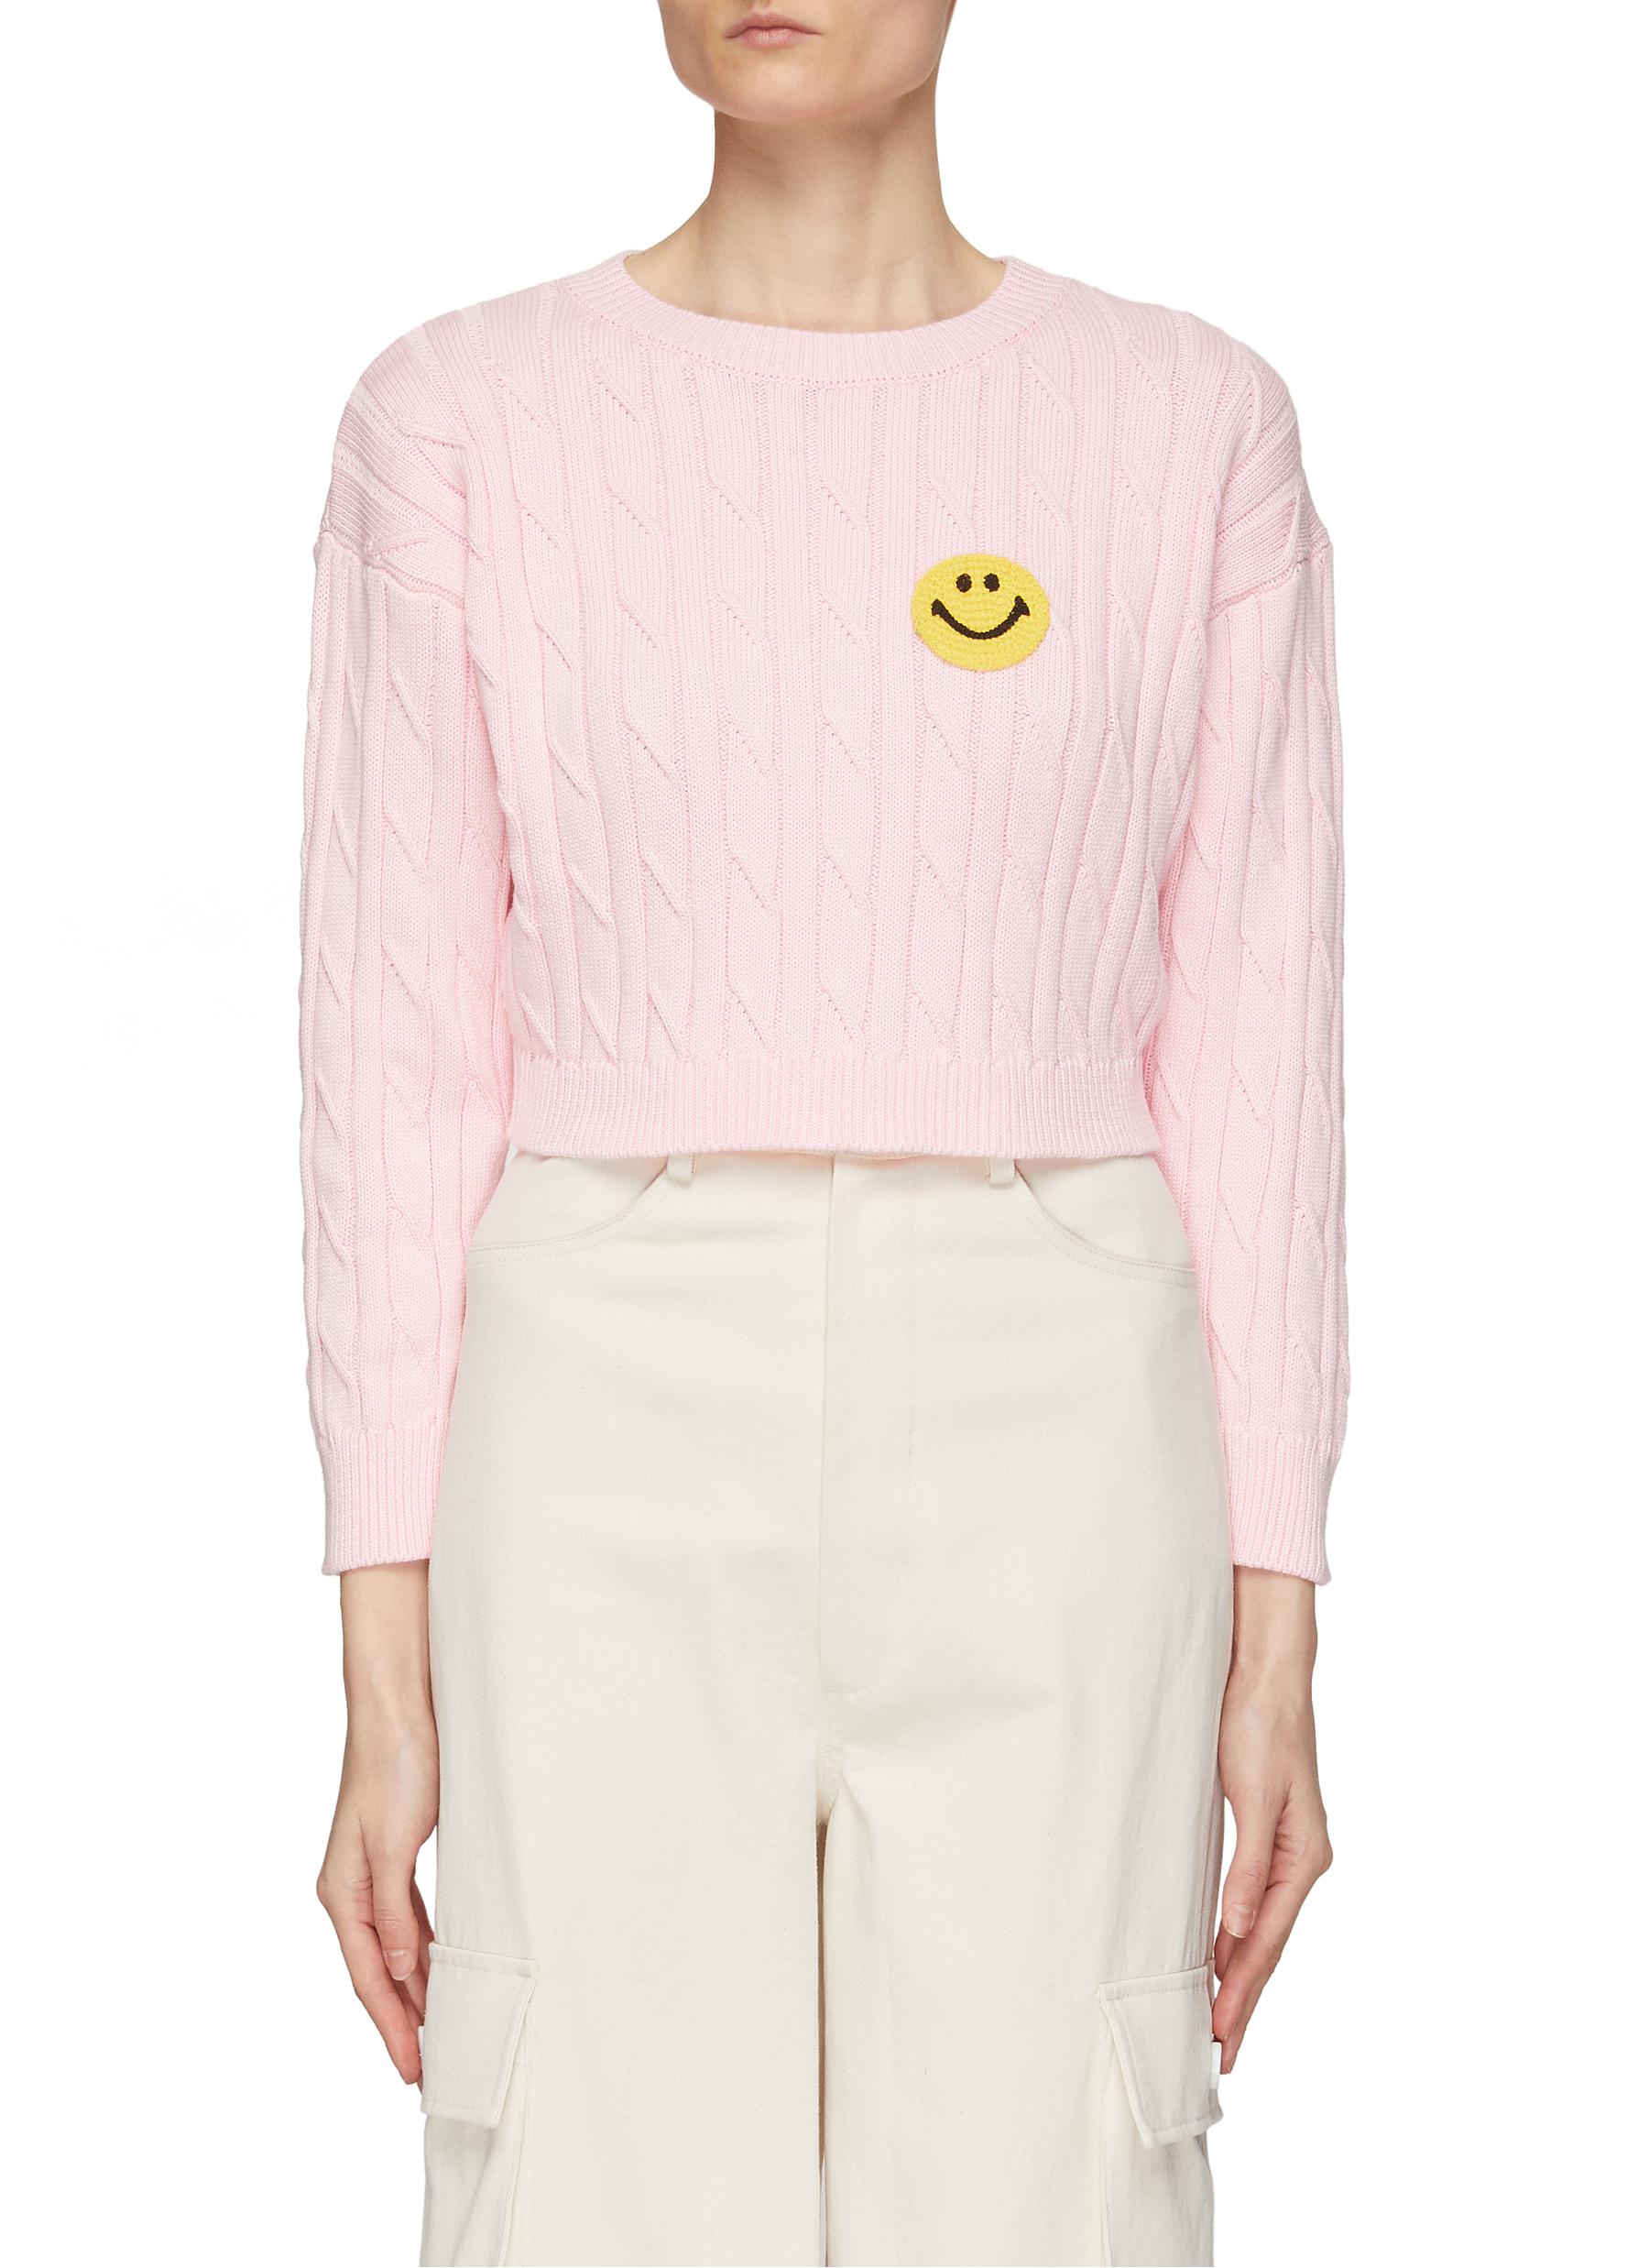 JOSHUA'S Crocheted Smiley Face Cotton Knit Cropped Sweater